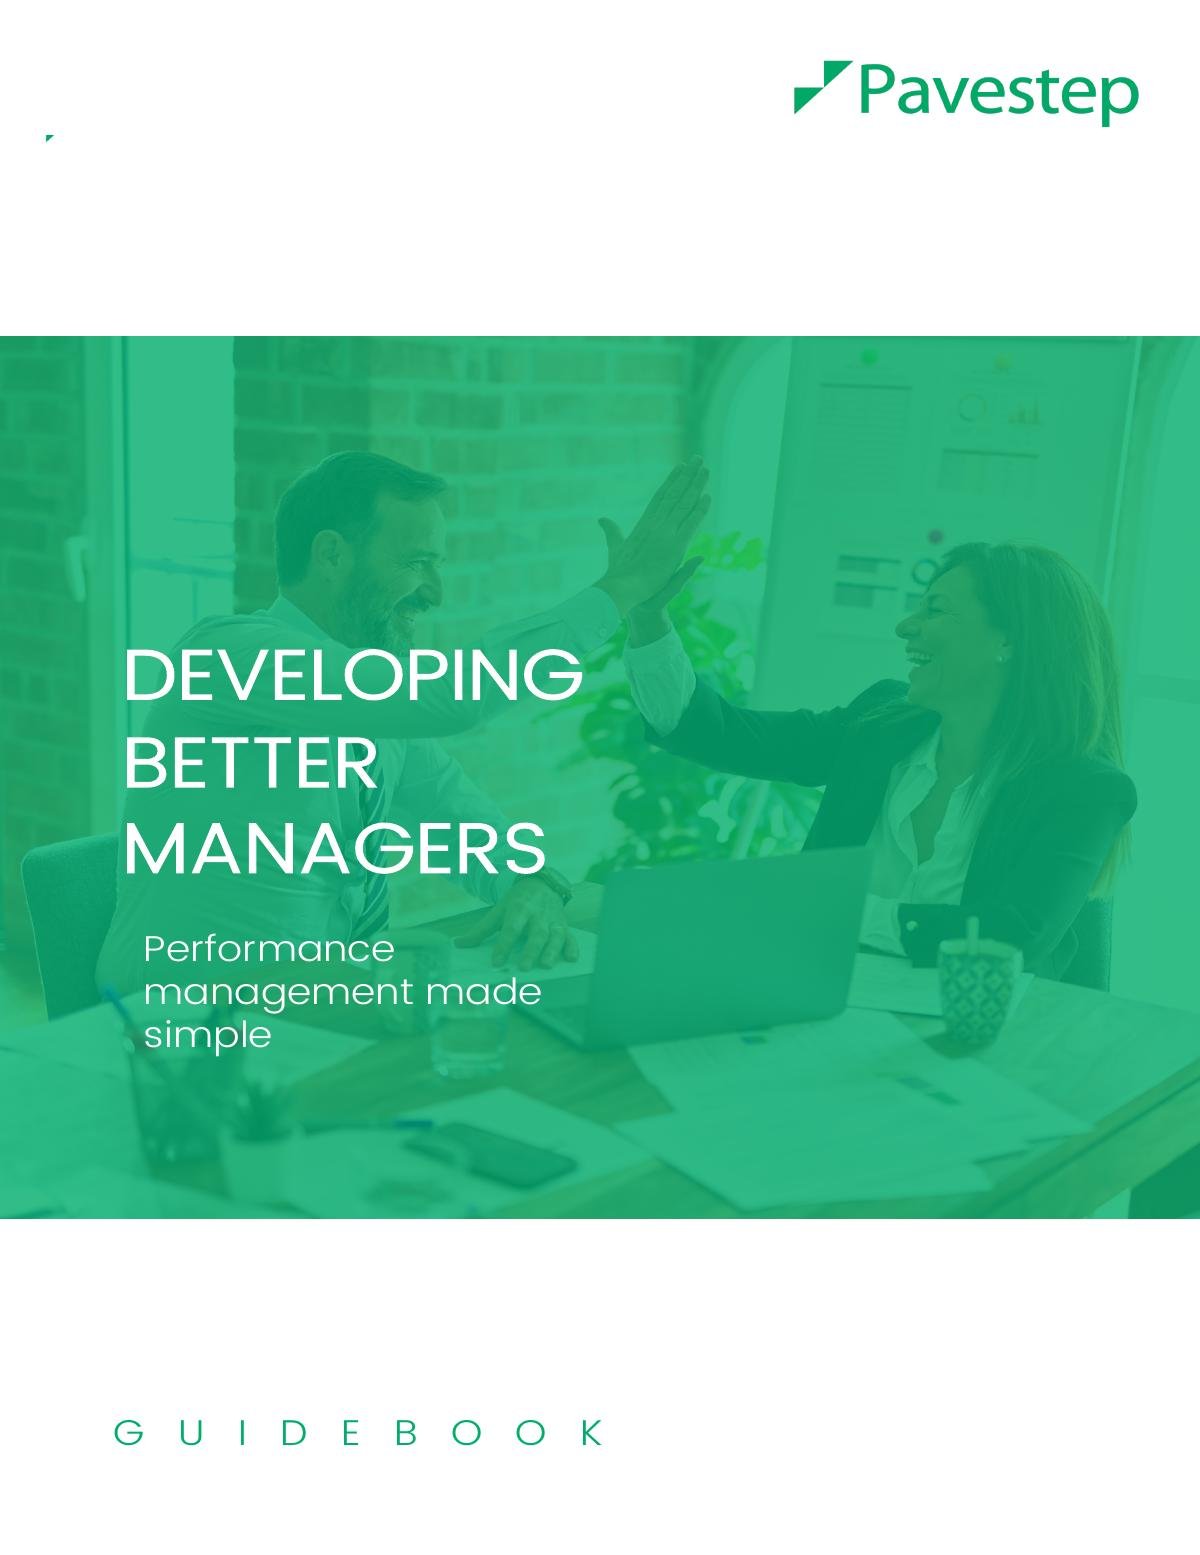 Your Guide to Developing Better Managers